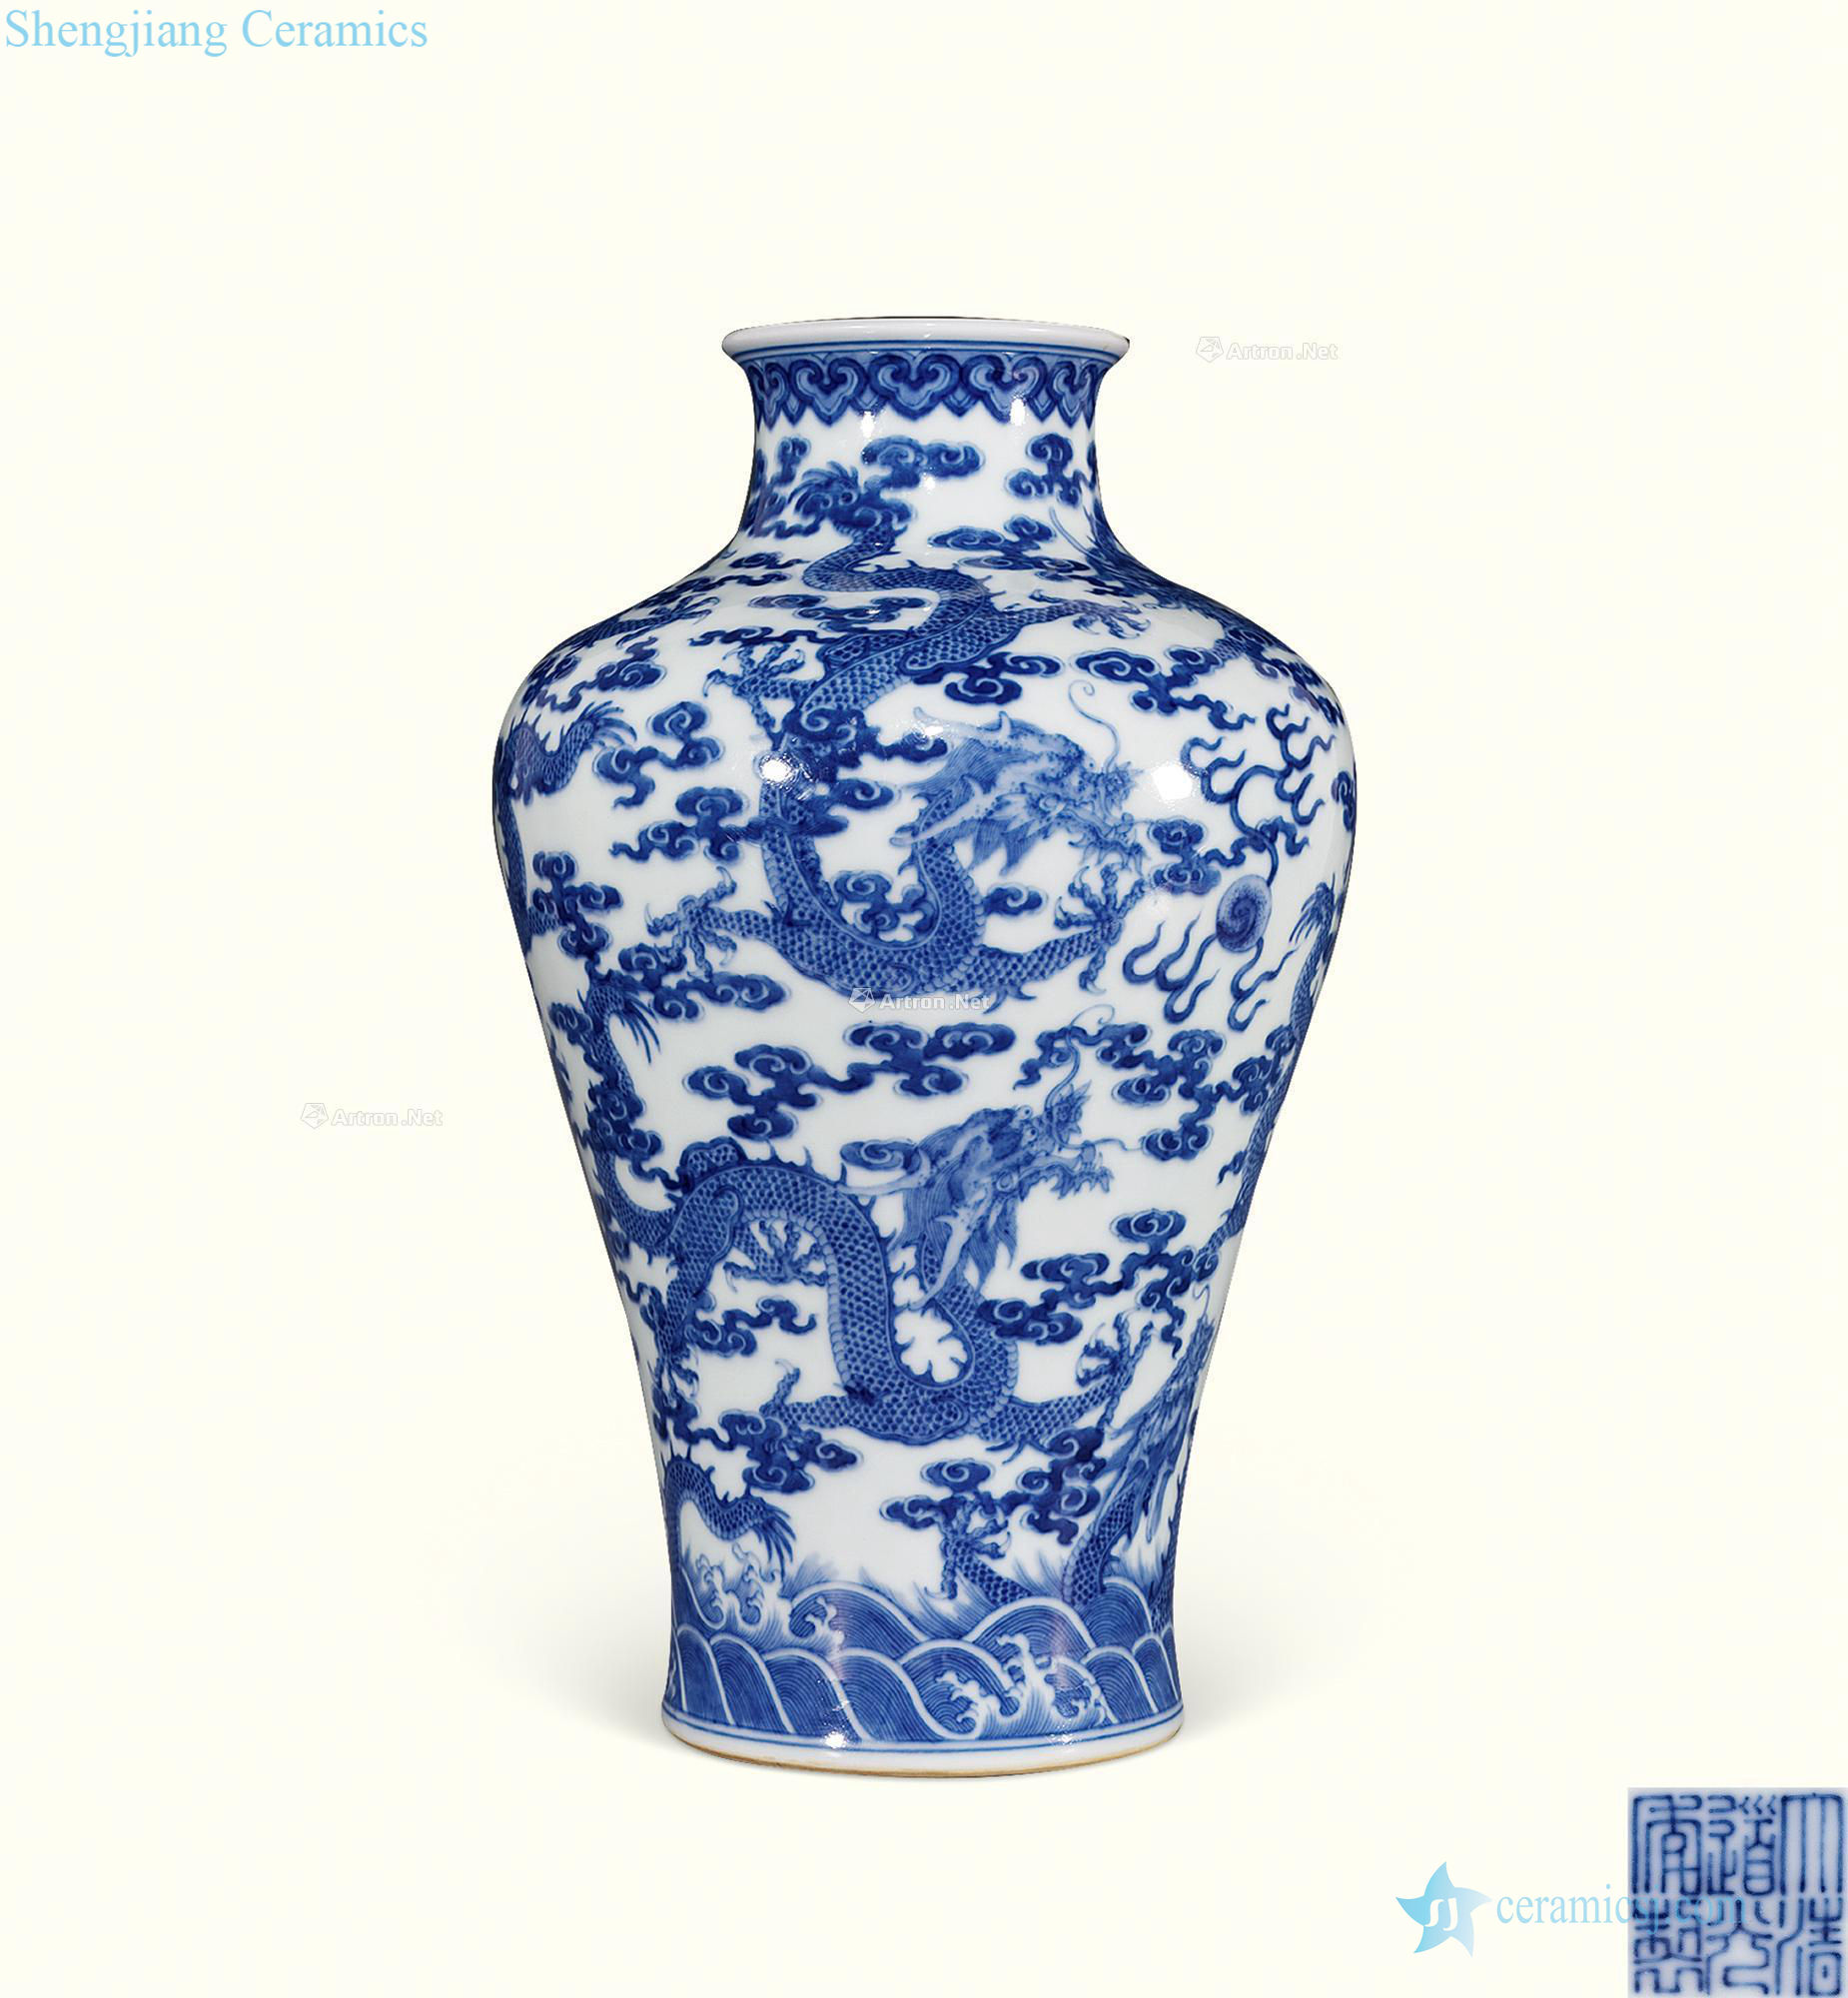 Qing daoguang Blue and white moire bottle, Kowloon